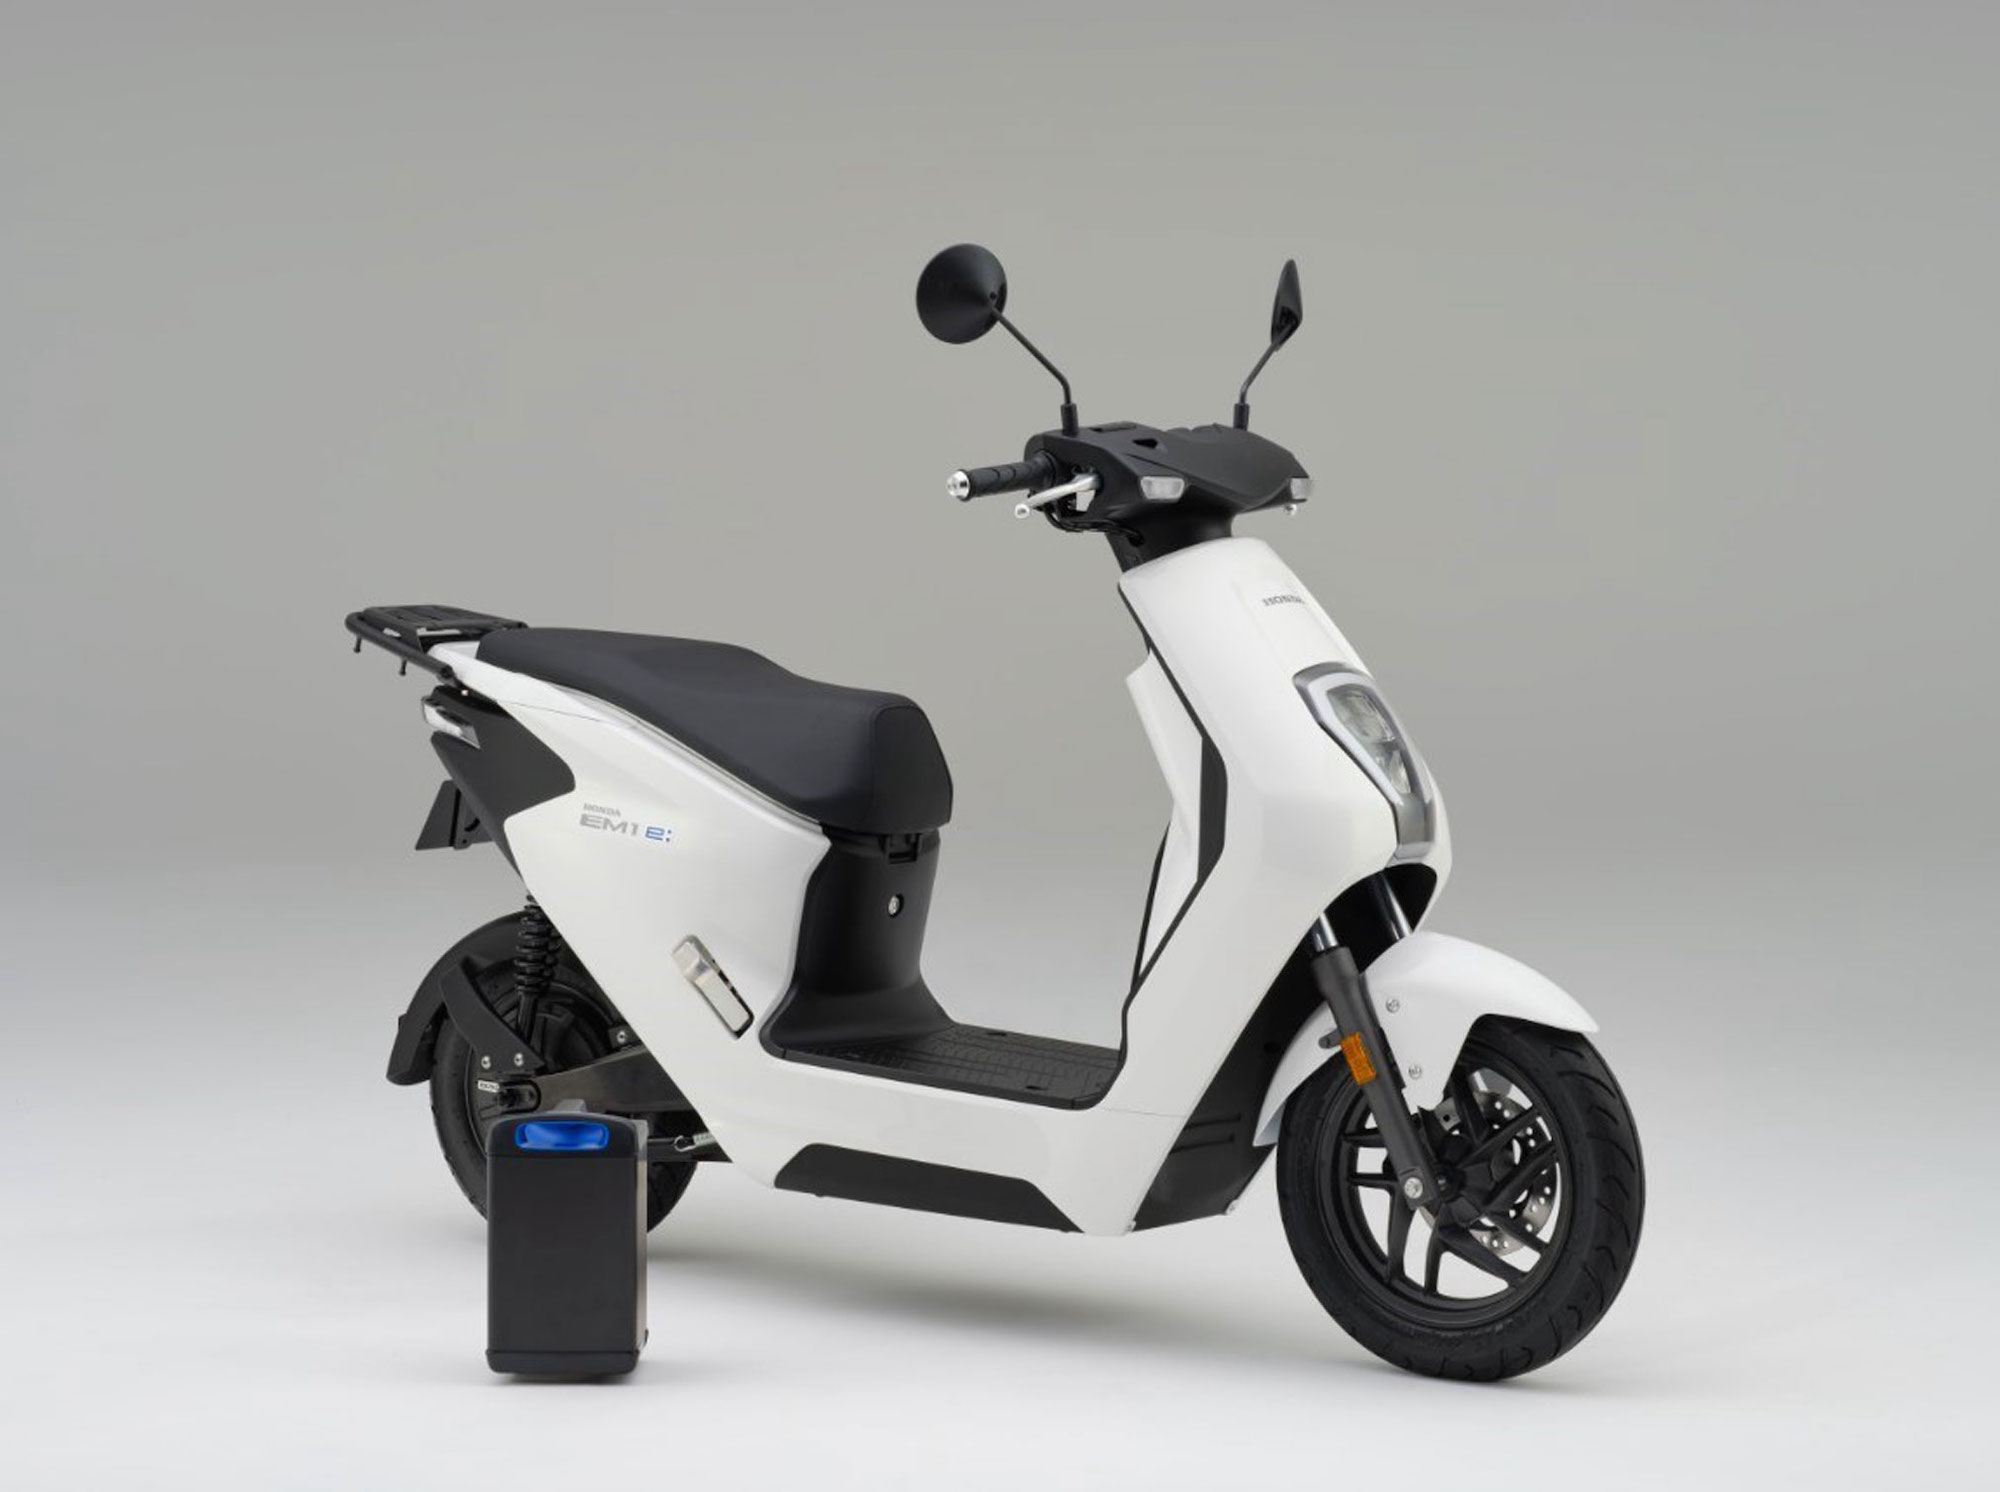 "EM1 e:" is Honda's first electric two-wheeler for EU. Media sourced from Total Motorcycle.